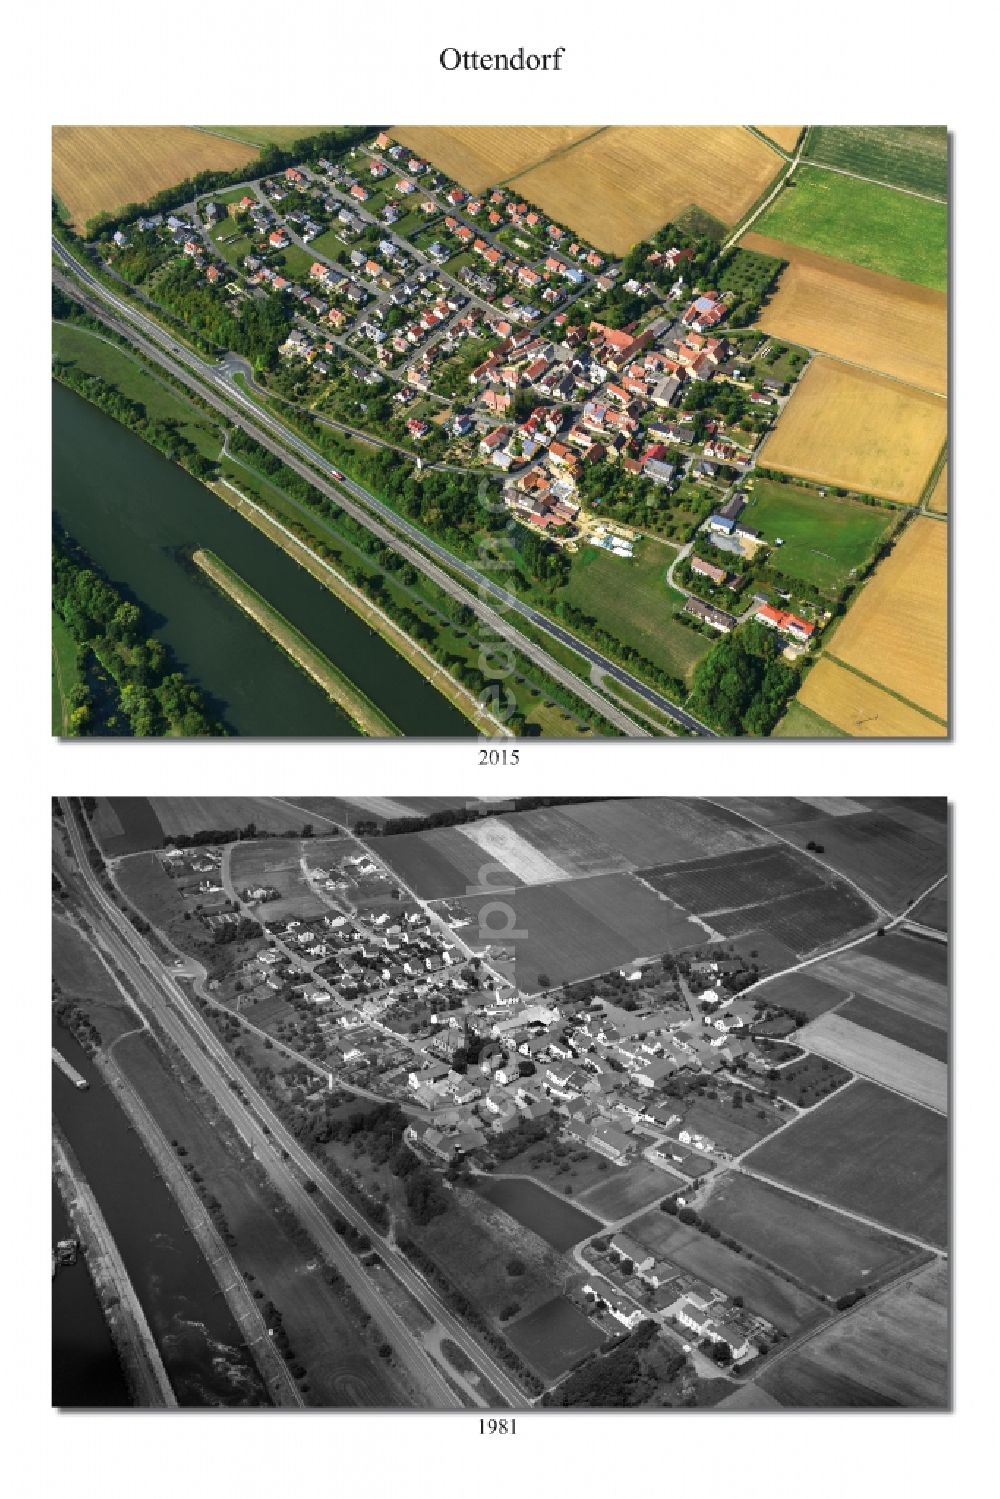 Ottendorf from above - 1981 and 2015 village - view change of Ottendorf in the state Bavaria